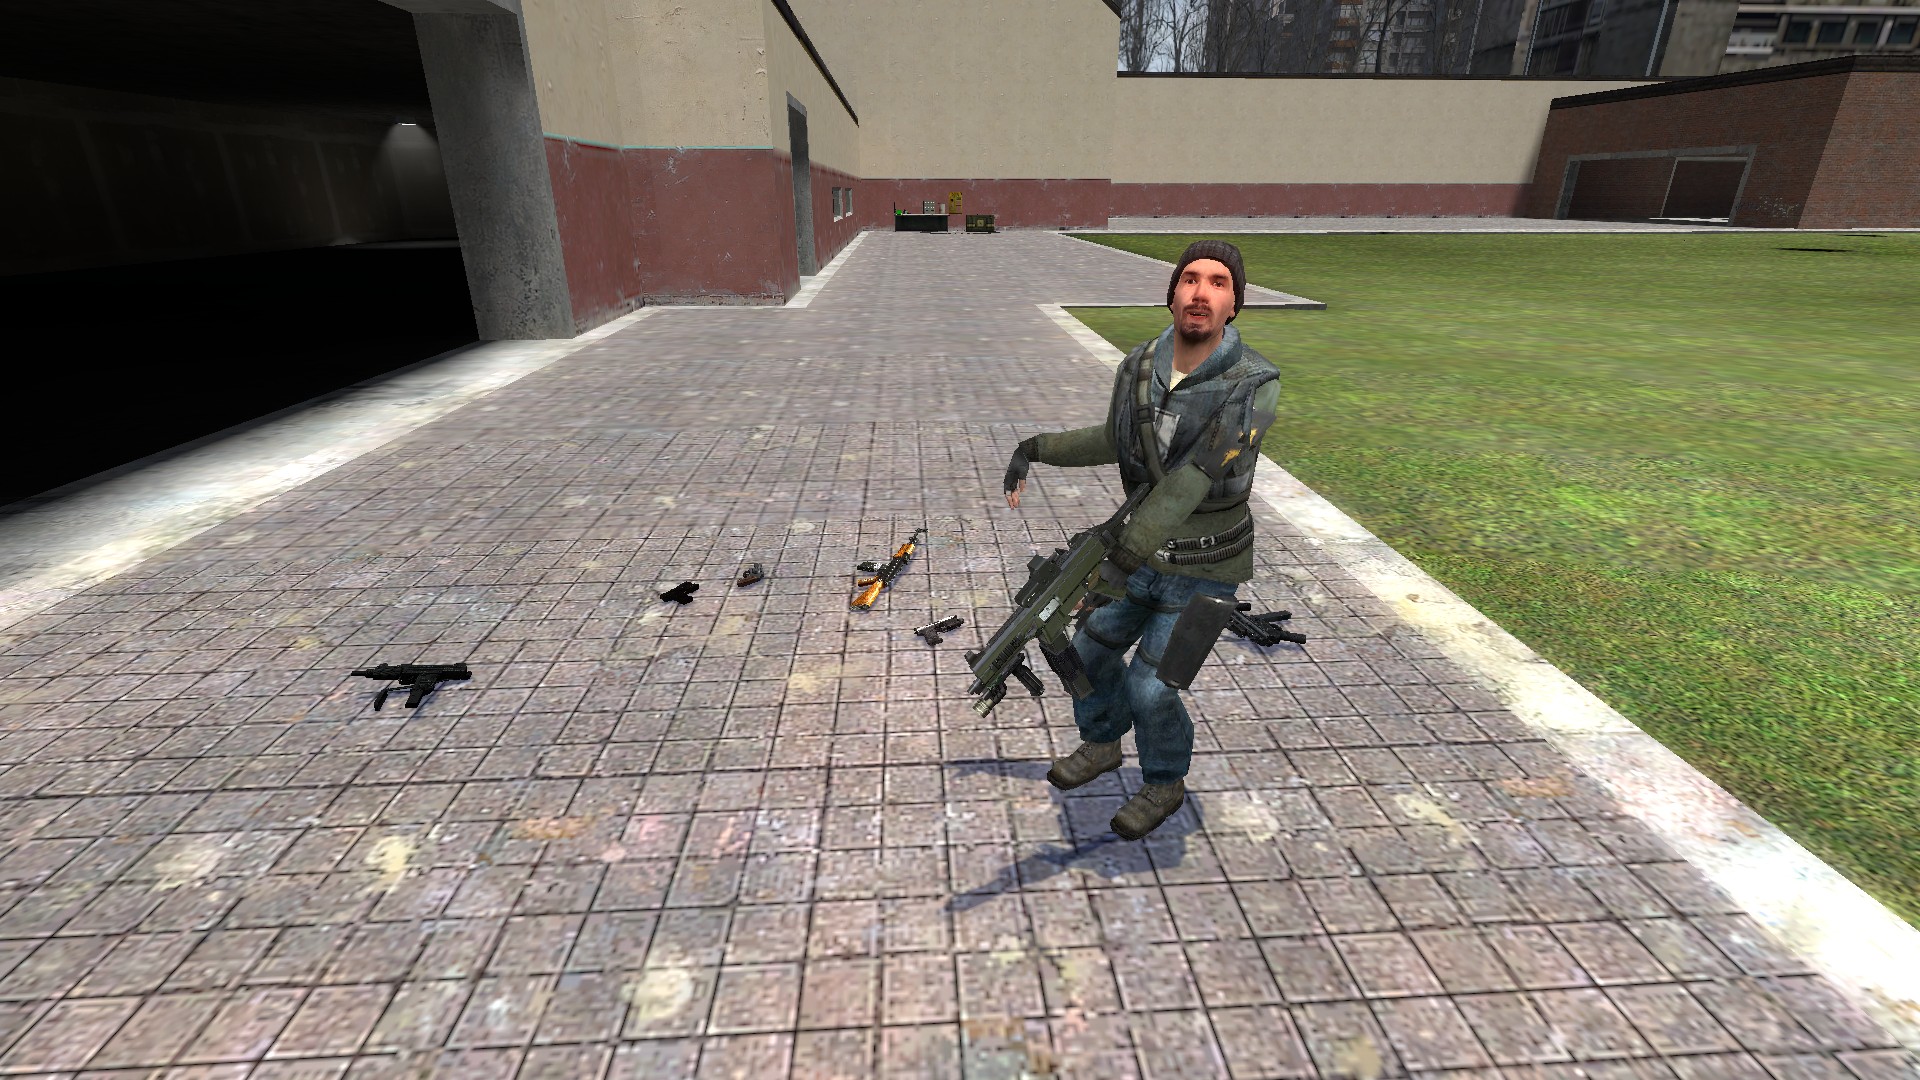 how to change the skin of a weapon in gmod